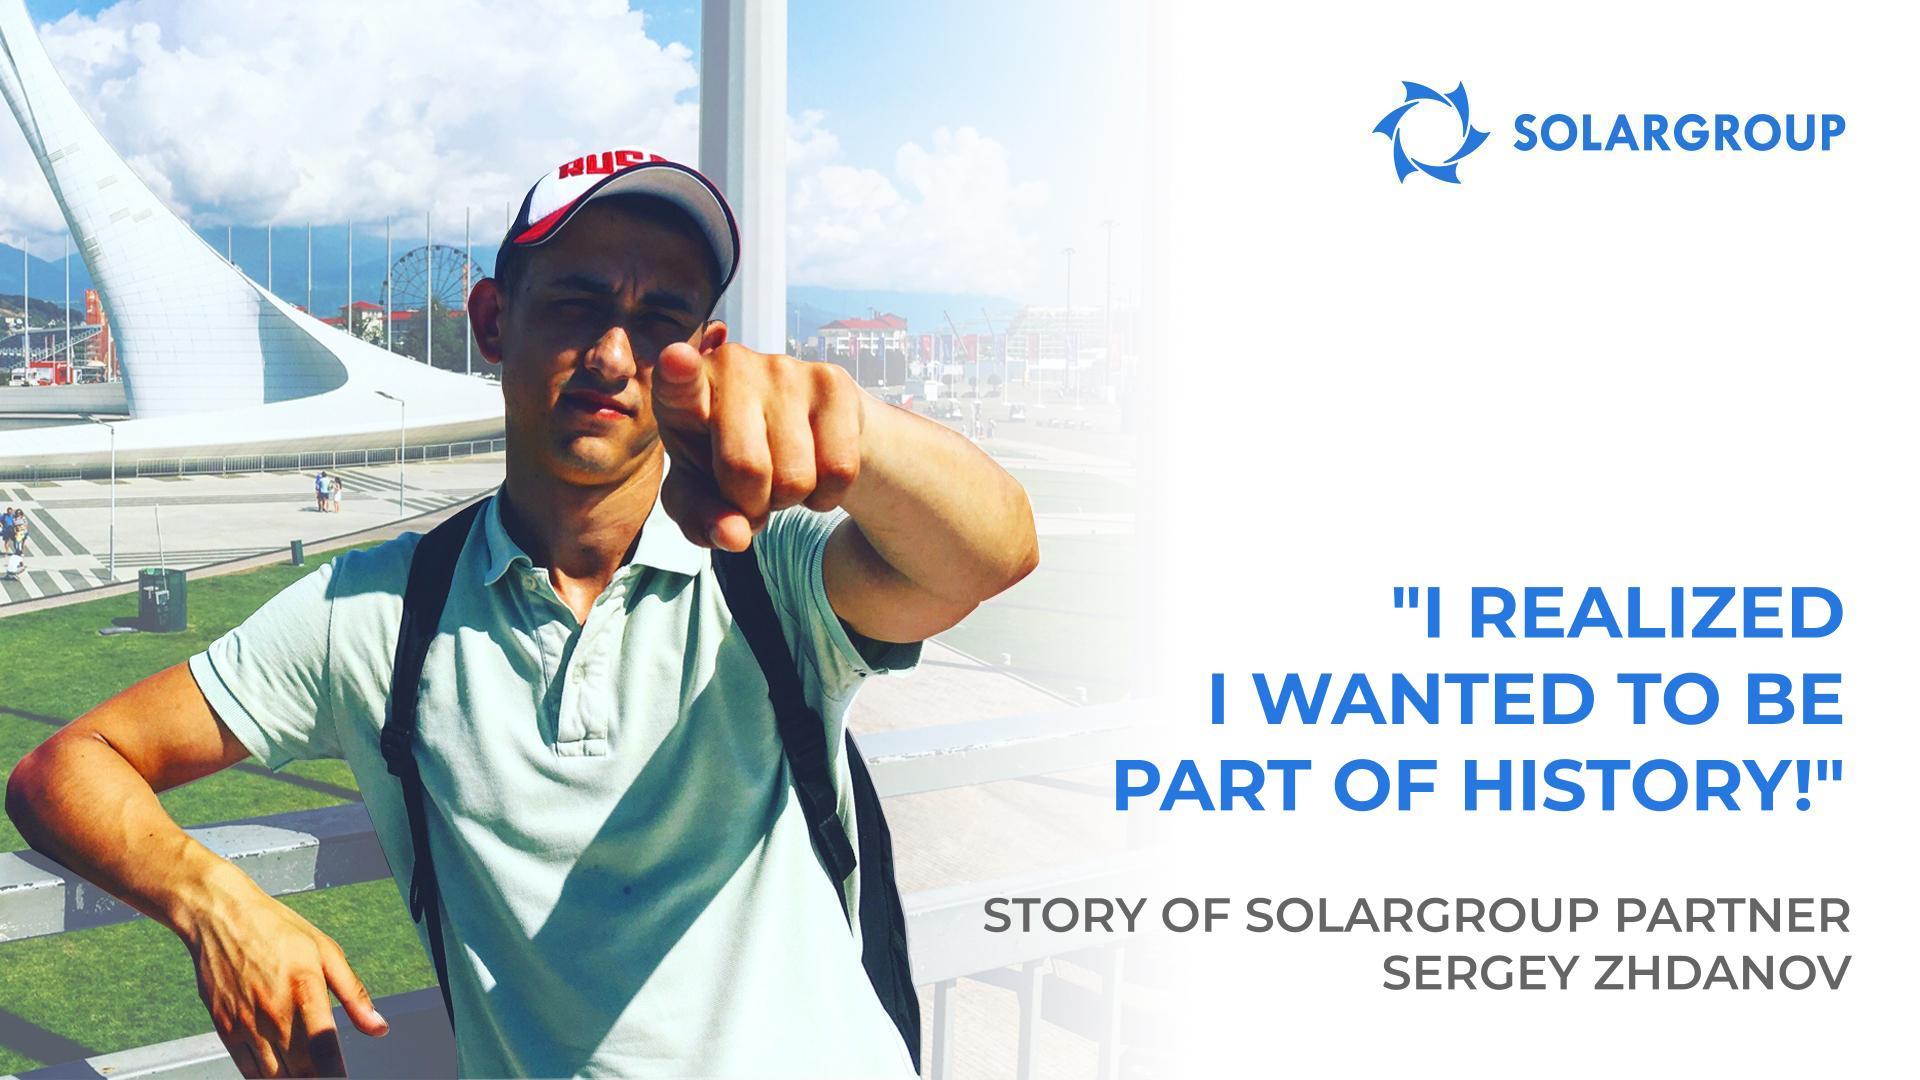 I am ready to go all the way with this company! The story of SOLARGROUP partner Sergey Zhdanov